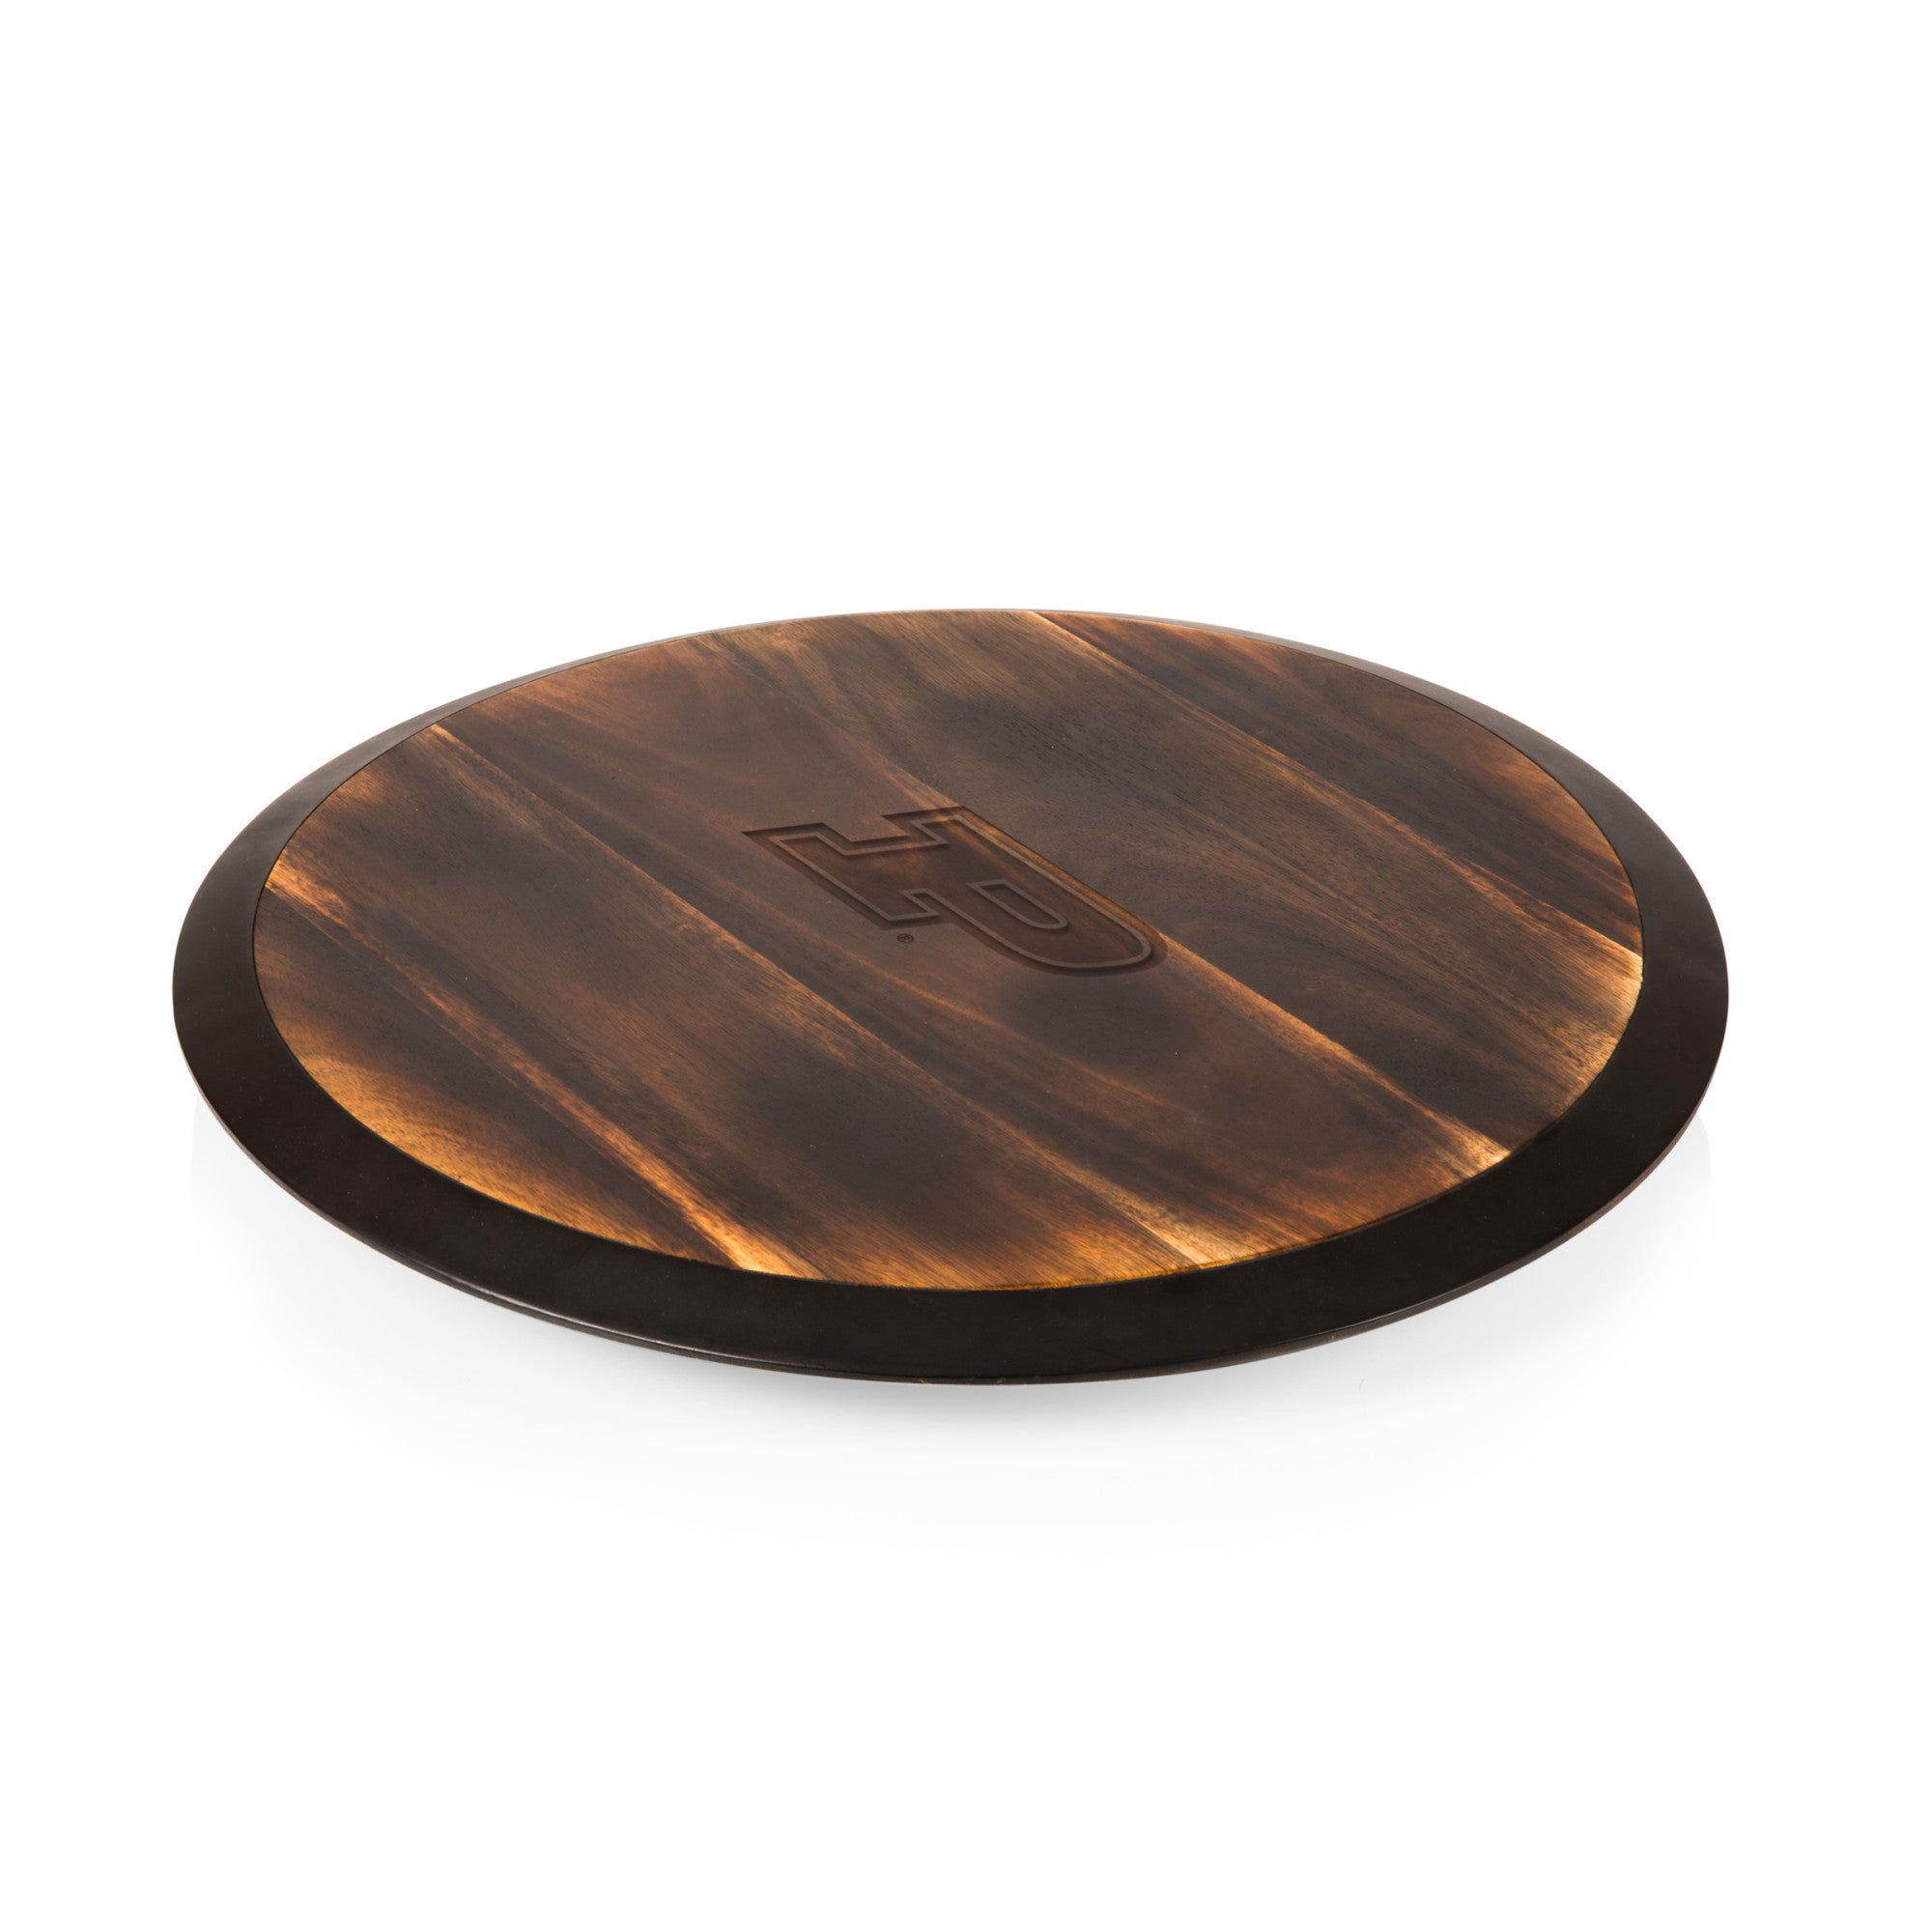 Purdue Boilermakers - Lazy Susan Serving Tray, (Fire Acacia Wood)